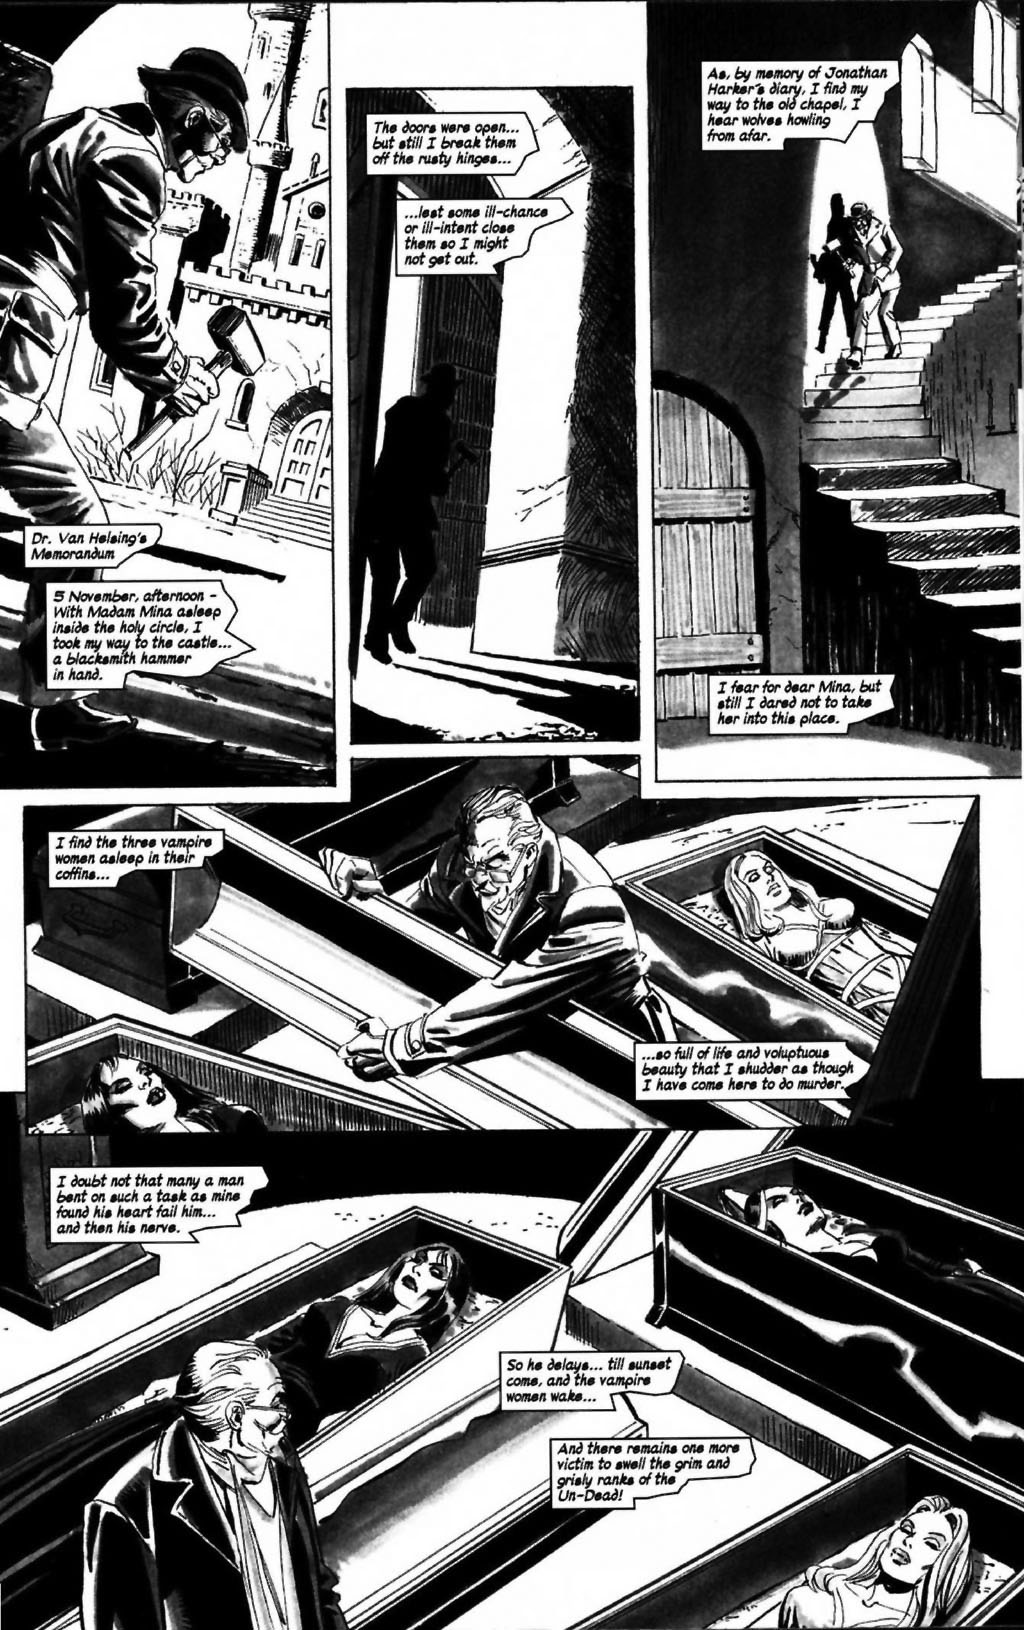 Read online Stoker's Dracula comic -  Issue #4 - 36